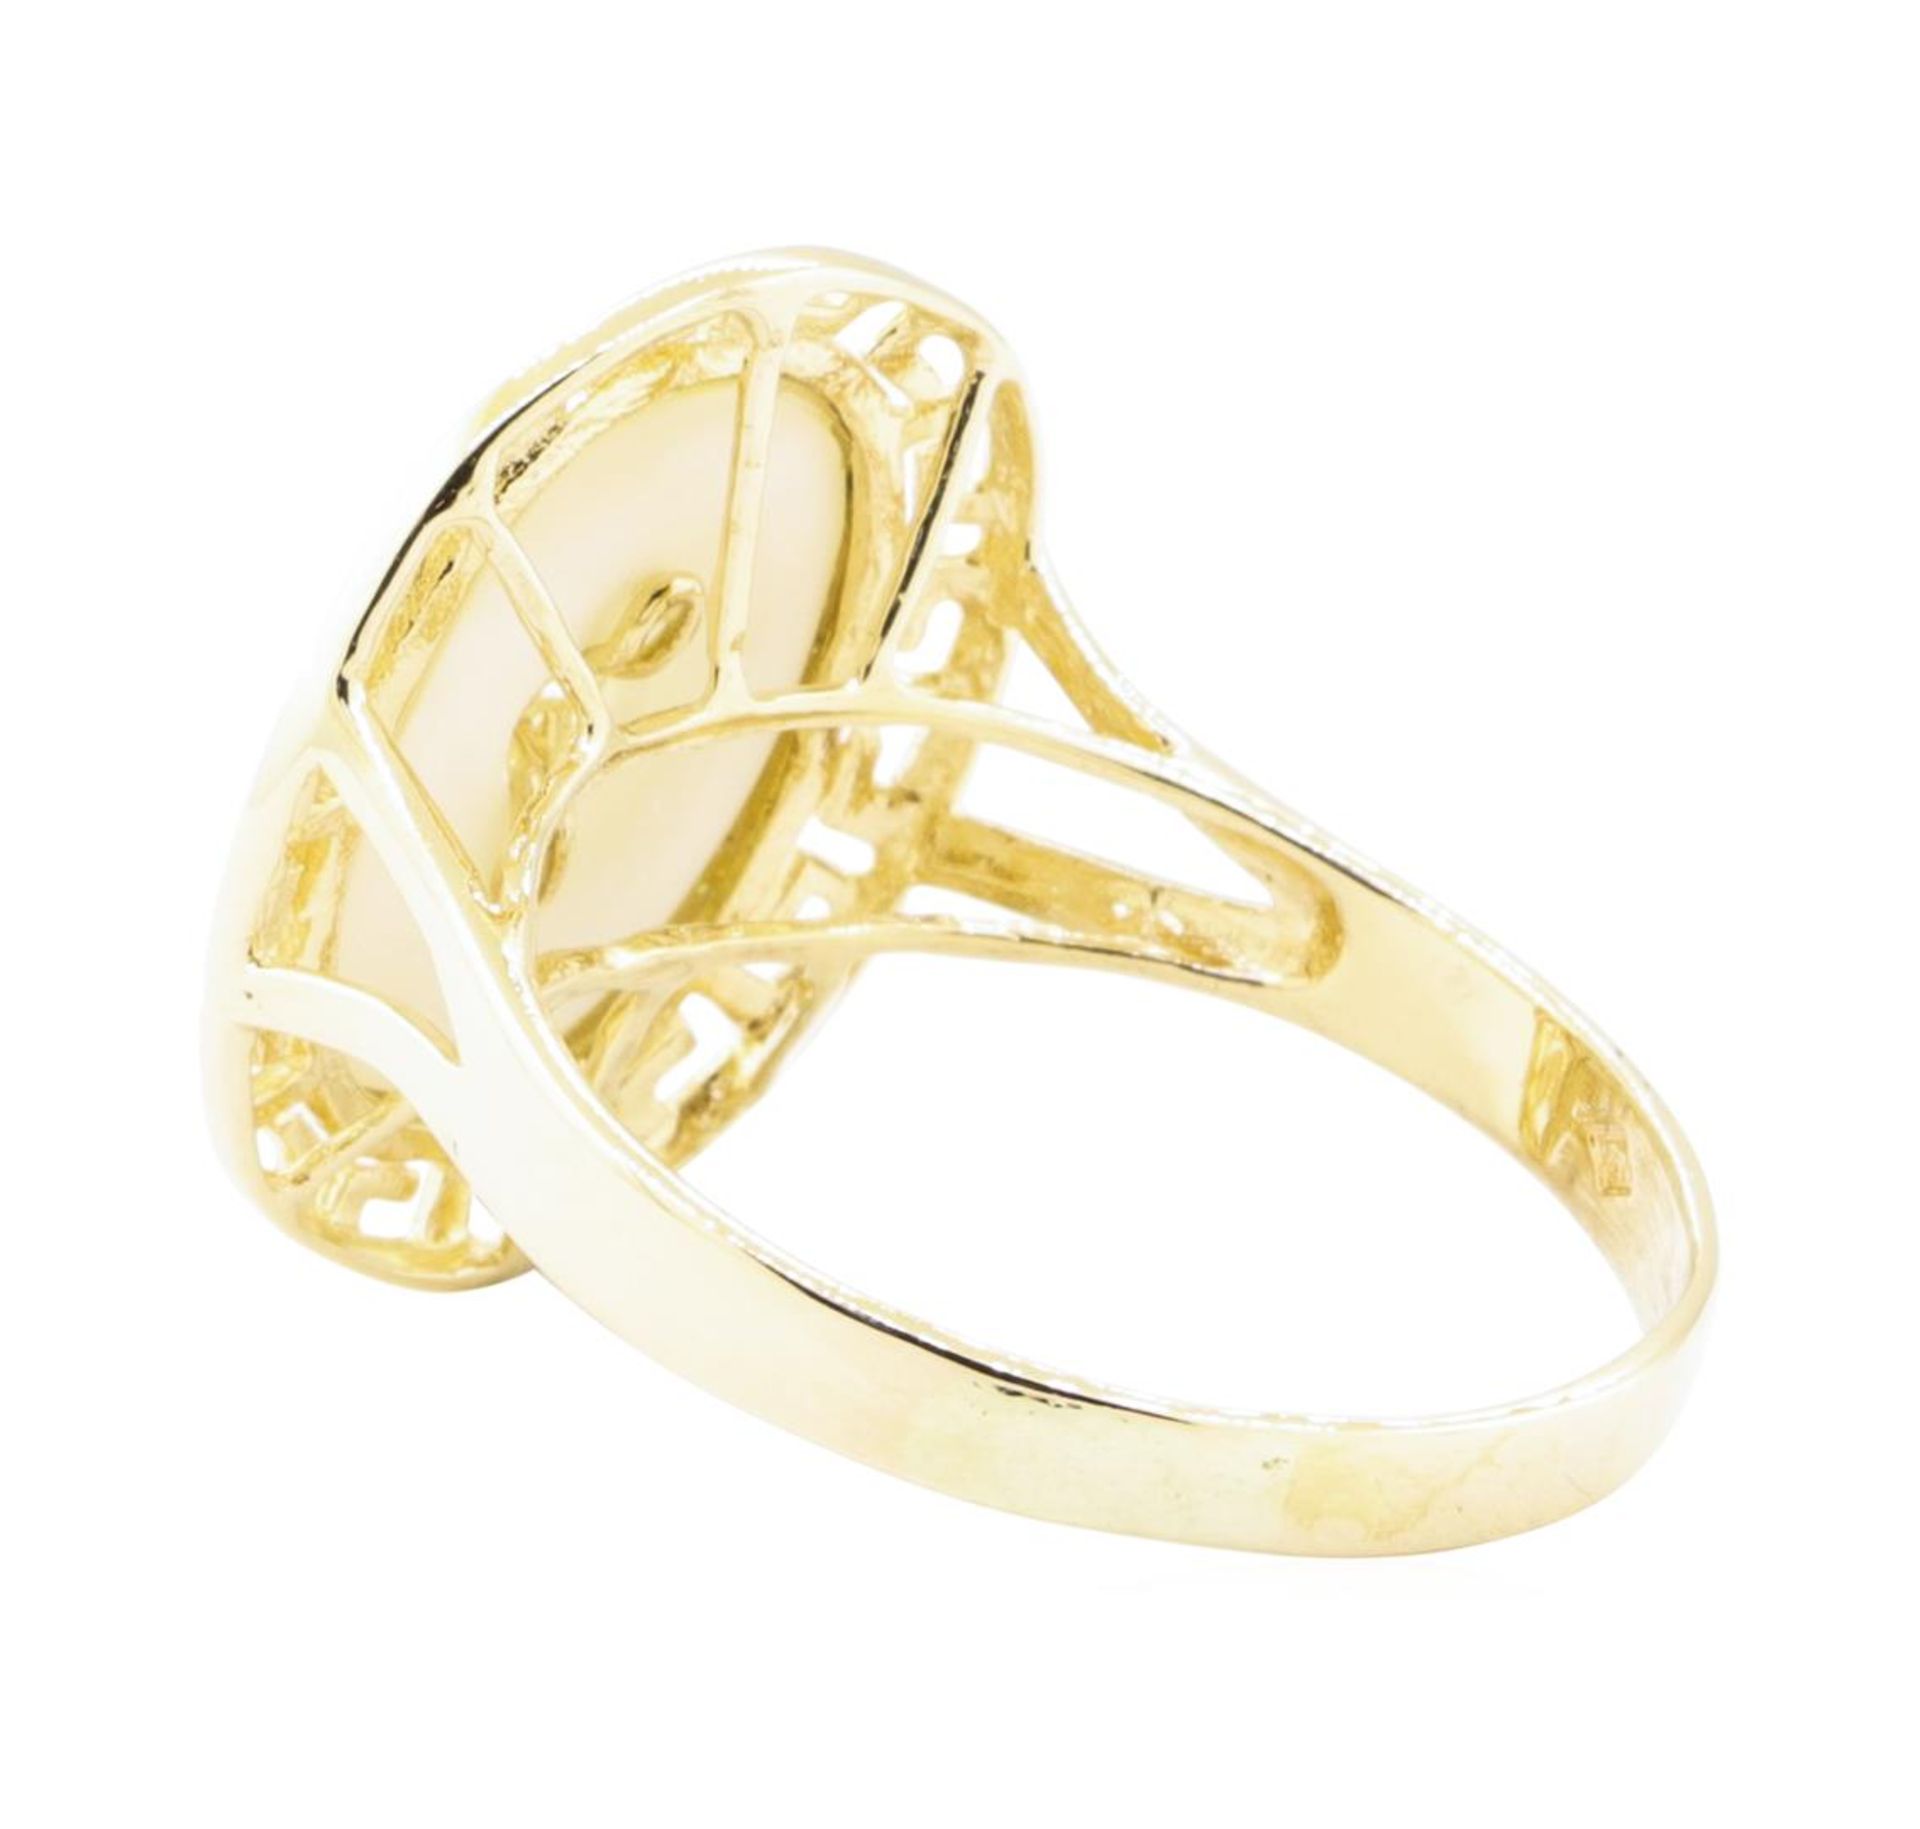 Inlaid Mother of Pearl Ring - 14KT Yellow Gold - Image 3 of 4